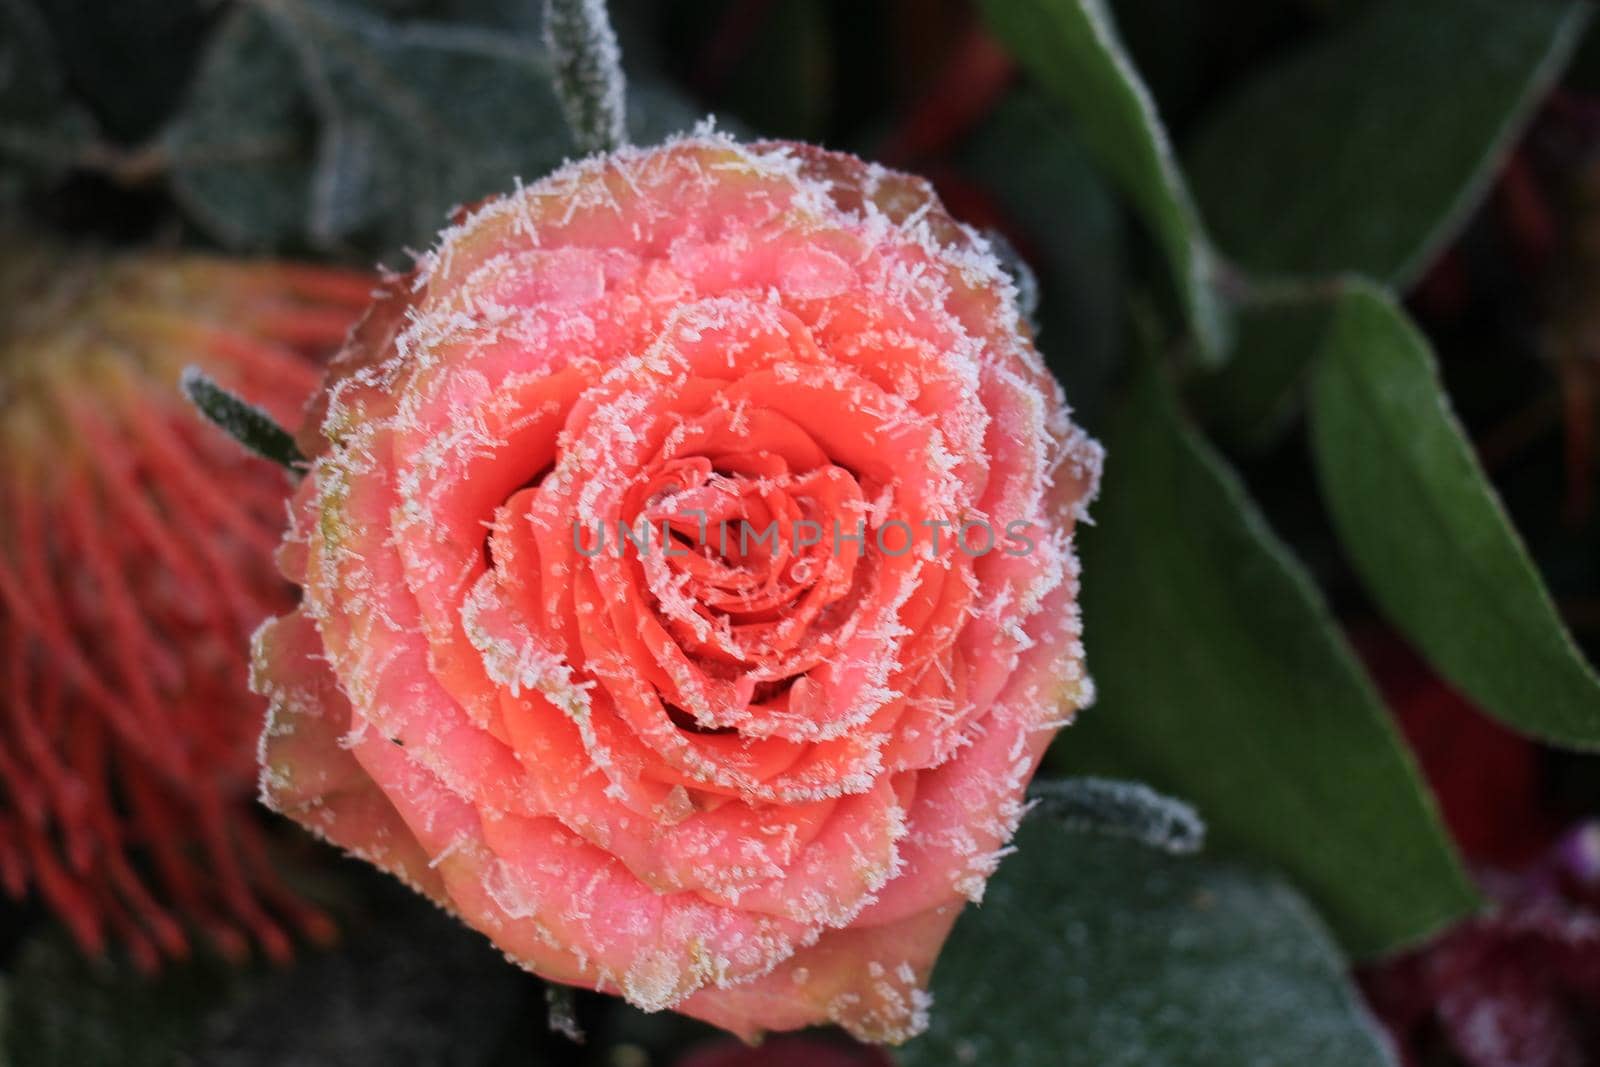 White hoar frost on a single pink rose